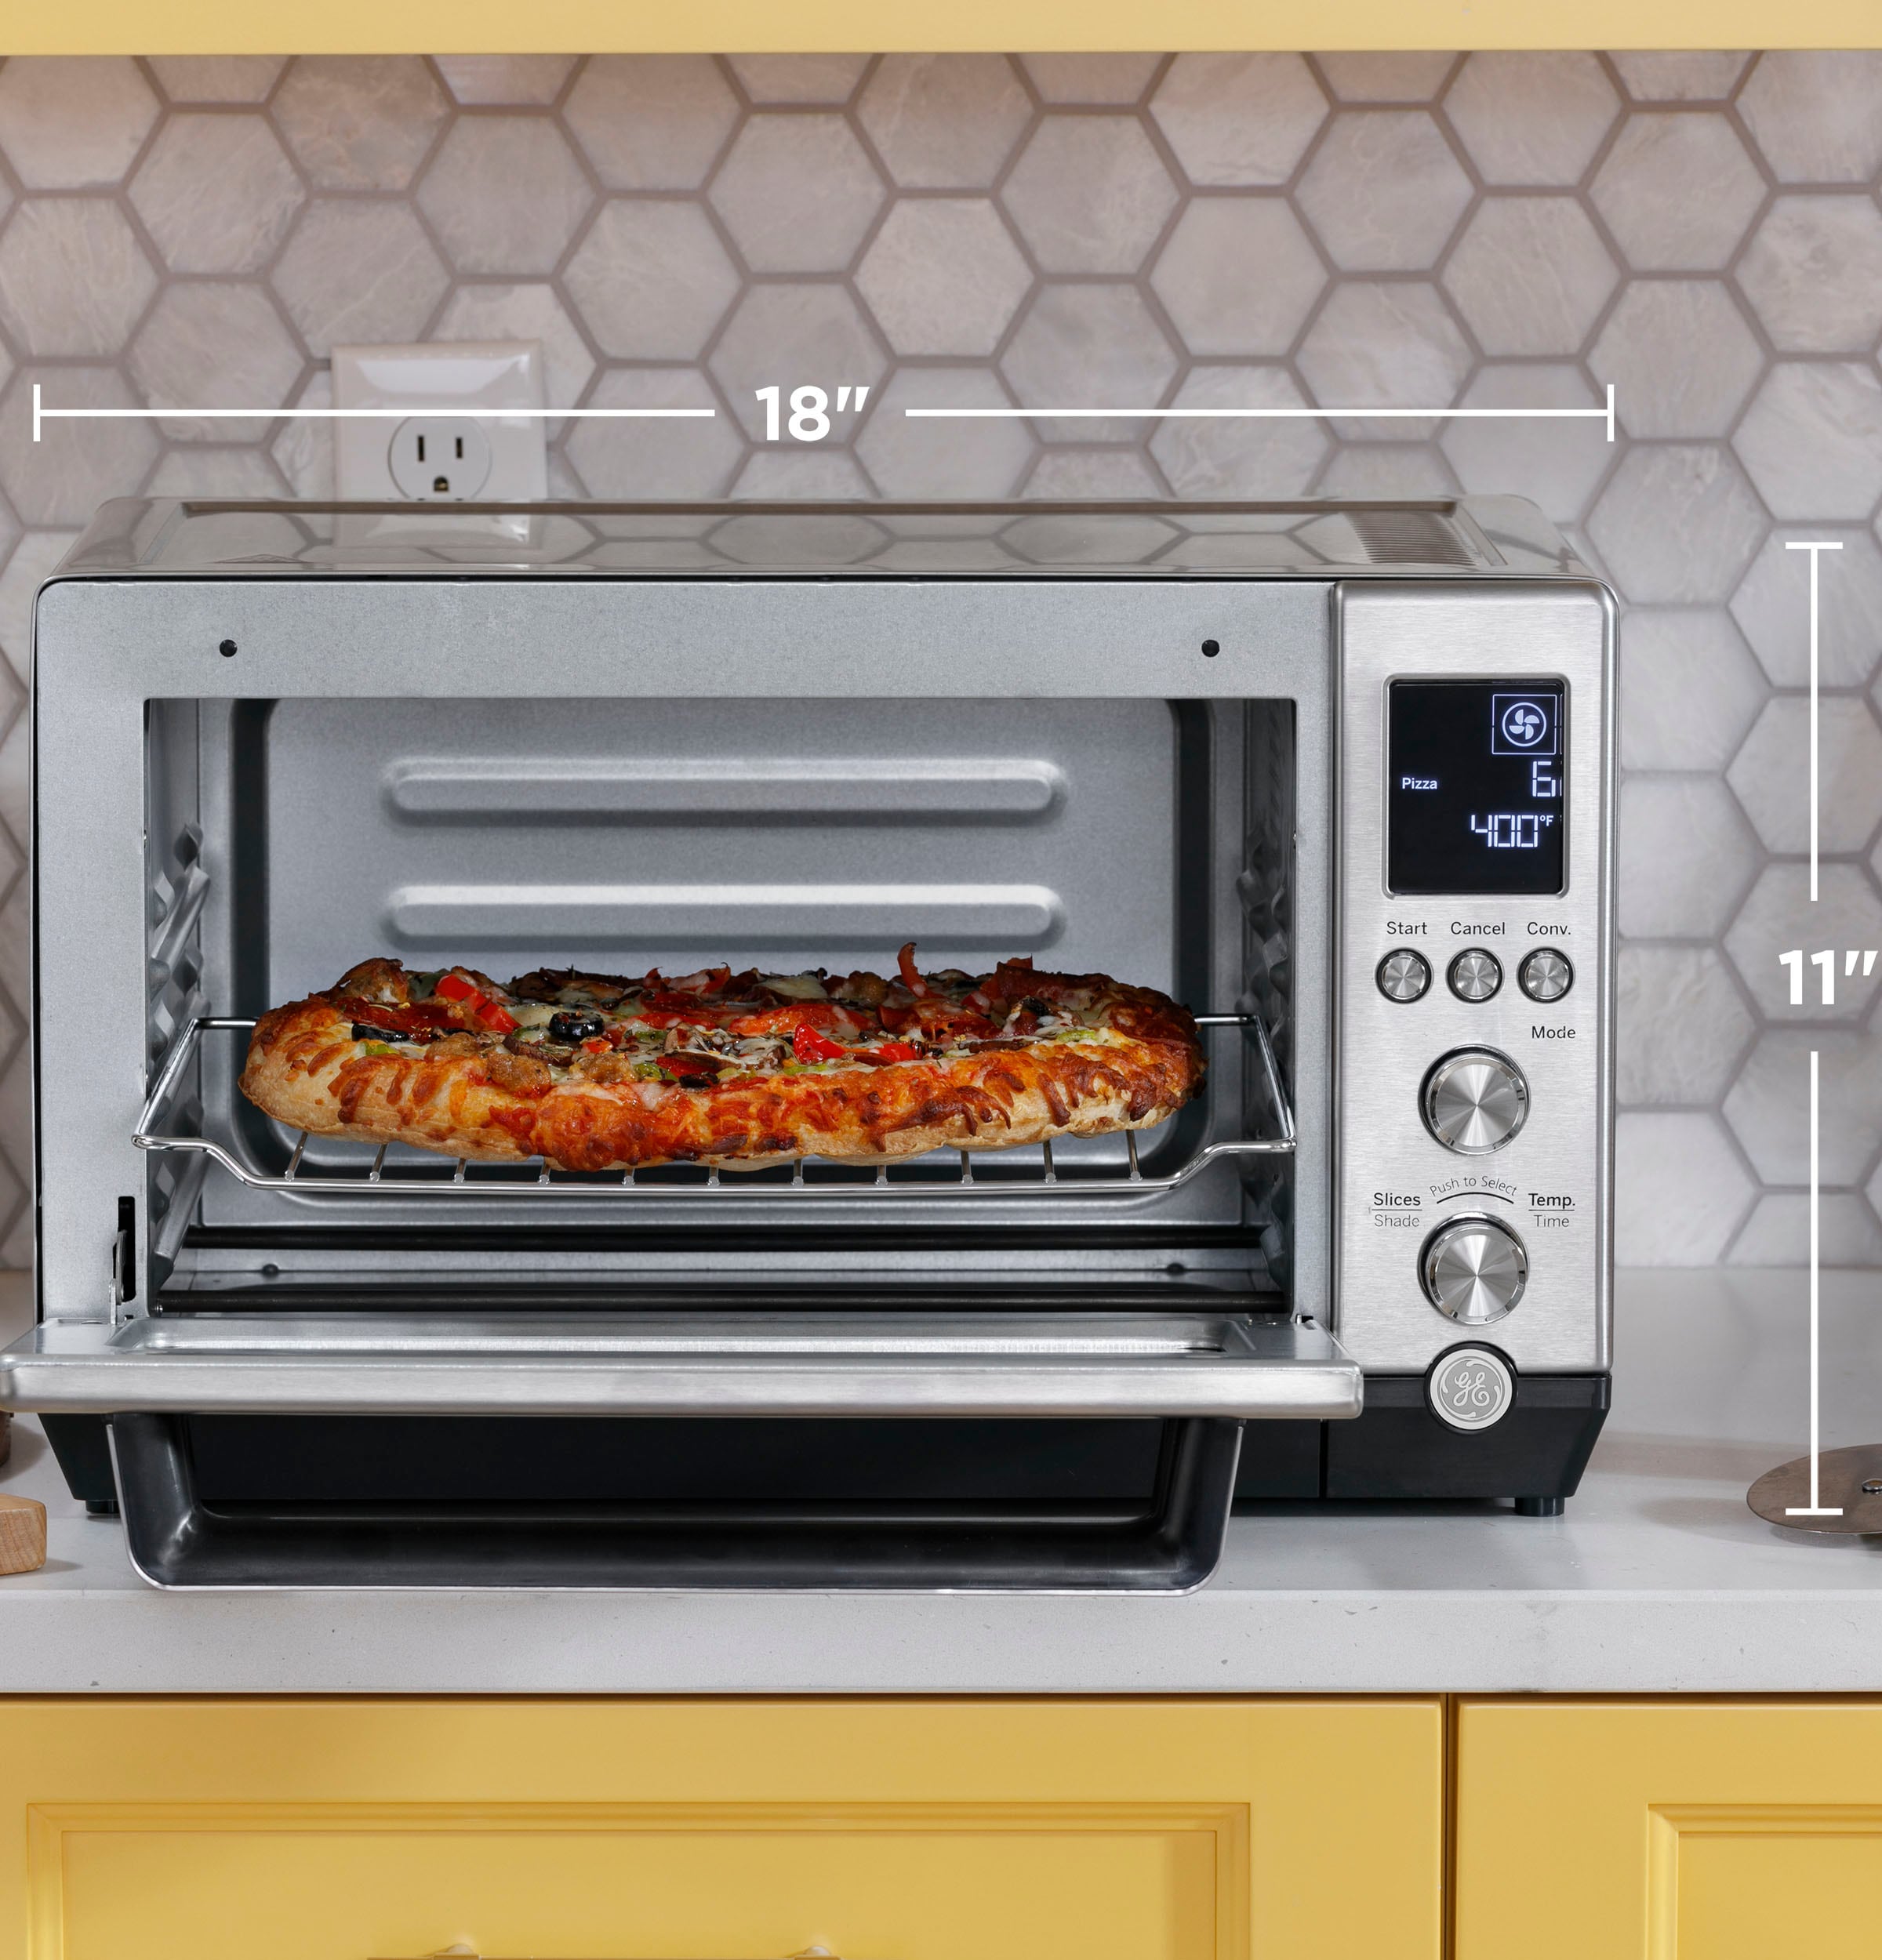 Convection Toaster Oven 6 Slice Brushed Stainless Steel Family-Size Pizza Cook 